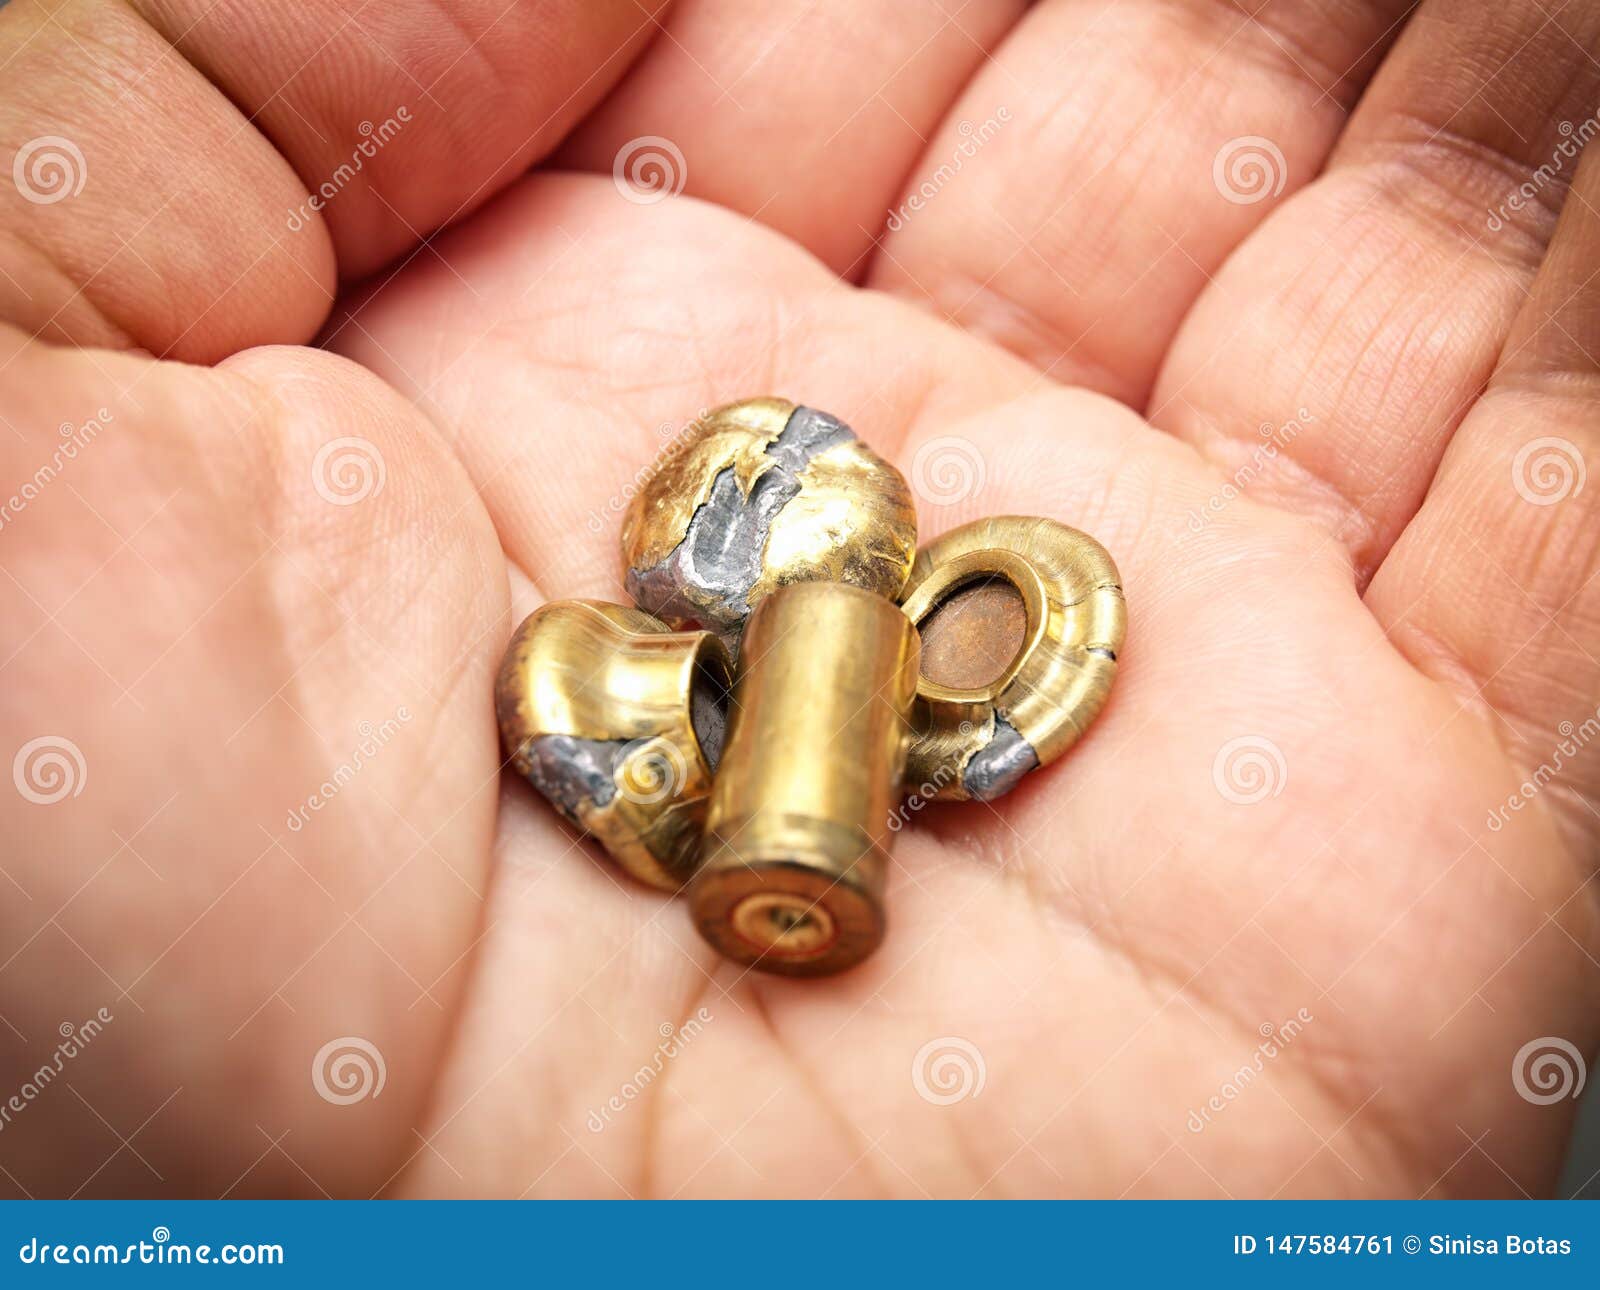 Fired ammo stock image. Image of destroyed, copper, metal - 147584761